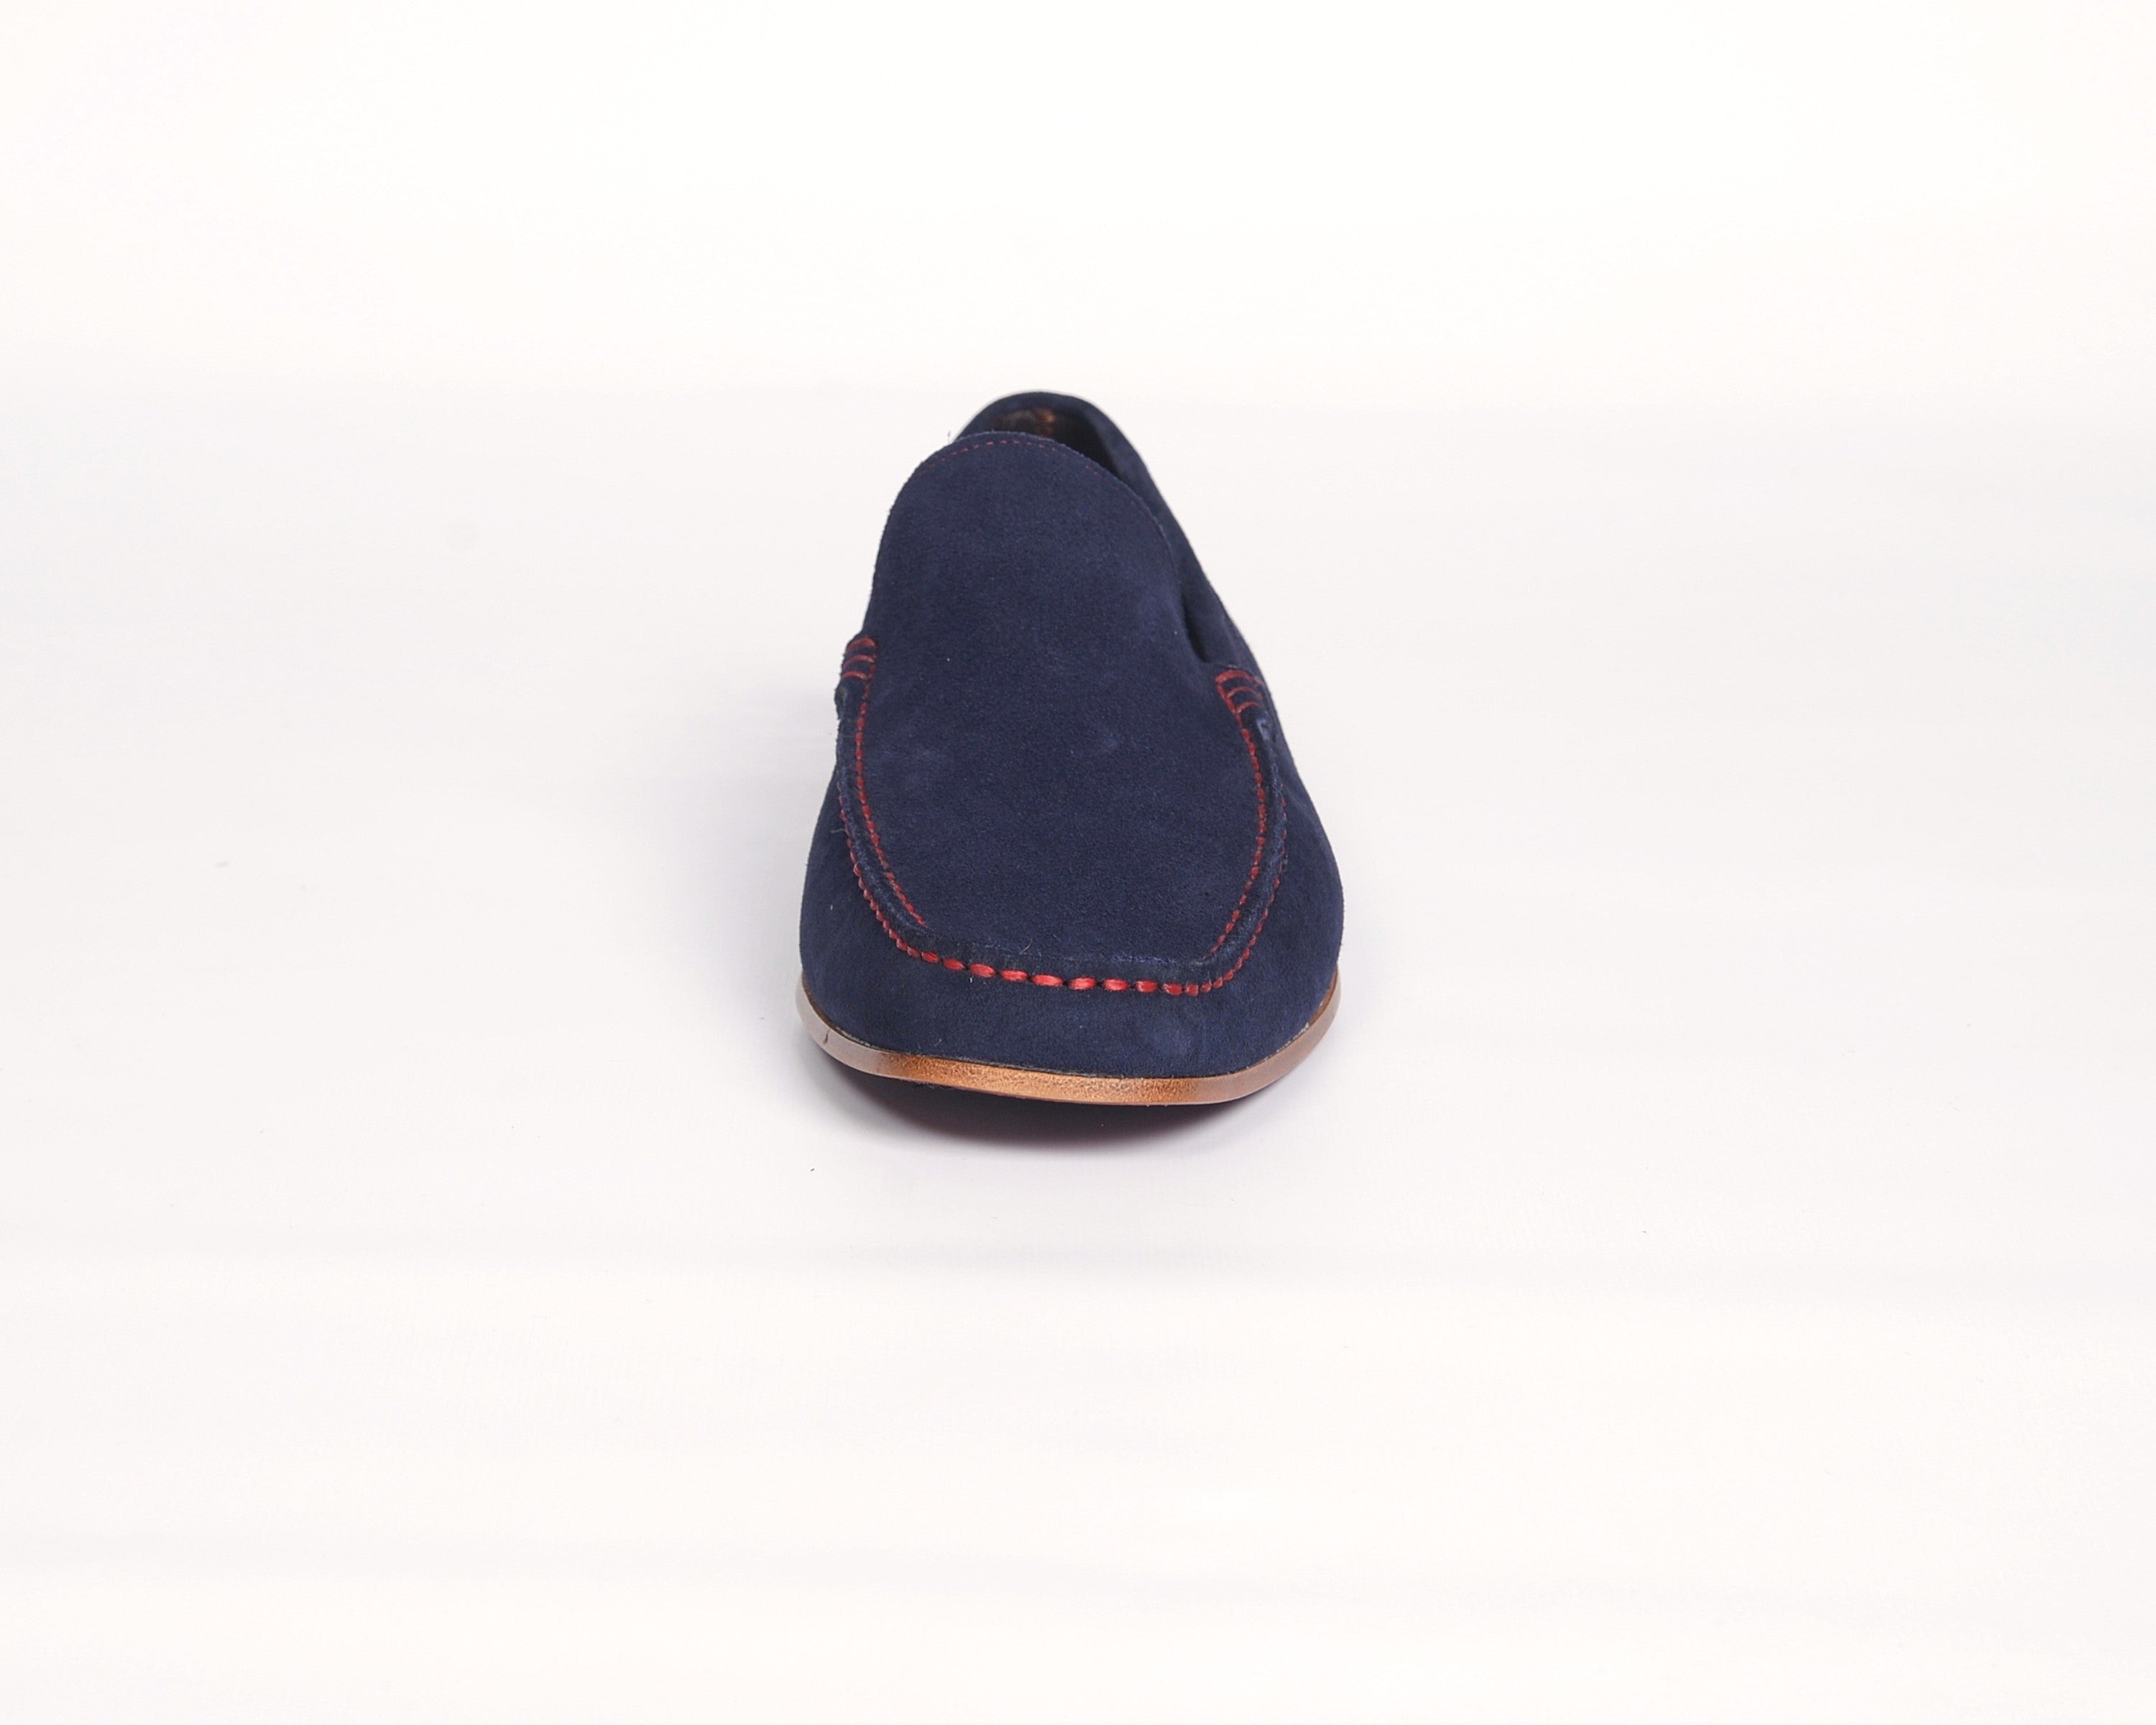 AN Moccasin Loafer (Blue Suede)